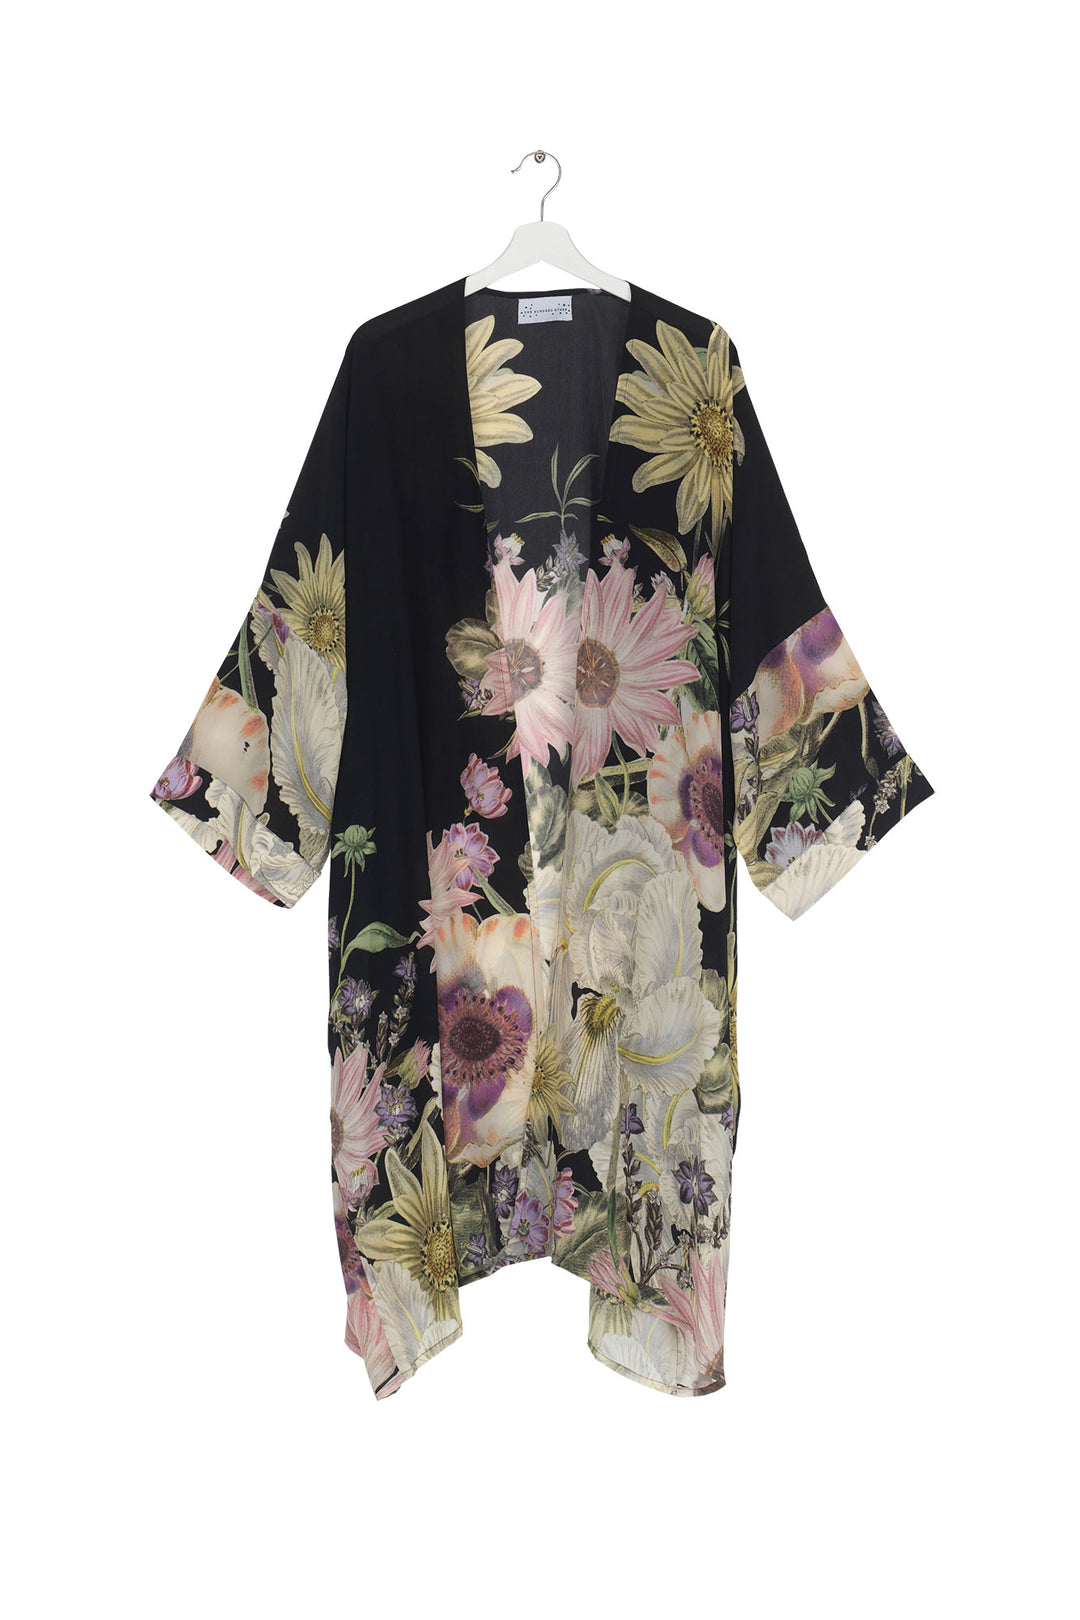 Women's long kimono in black with daisy floral print by One Hundred Stars